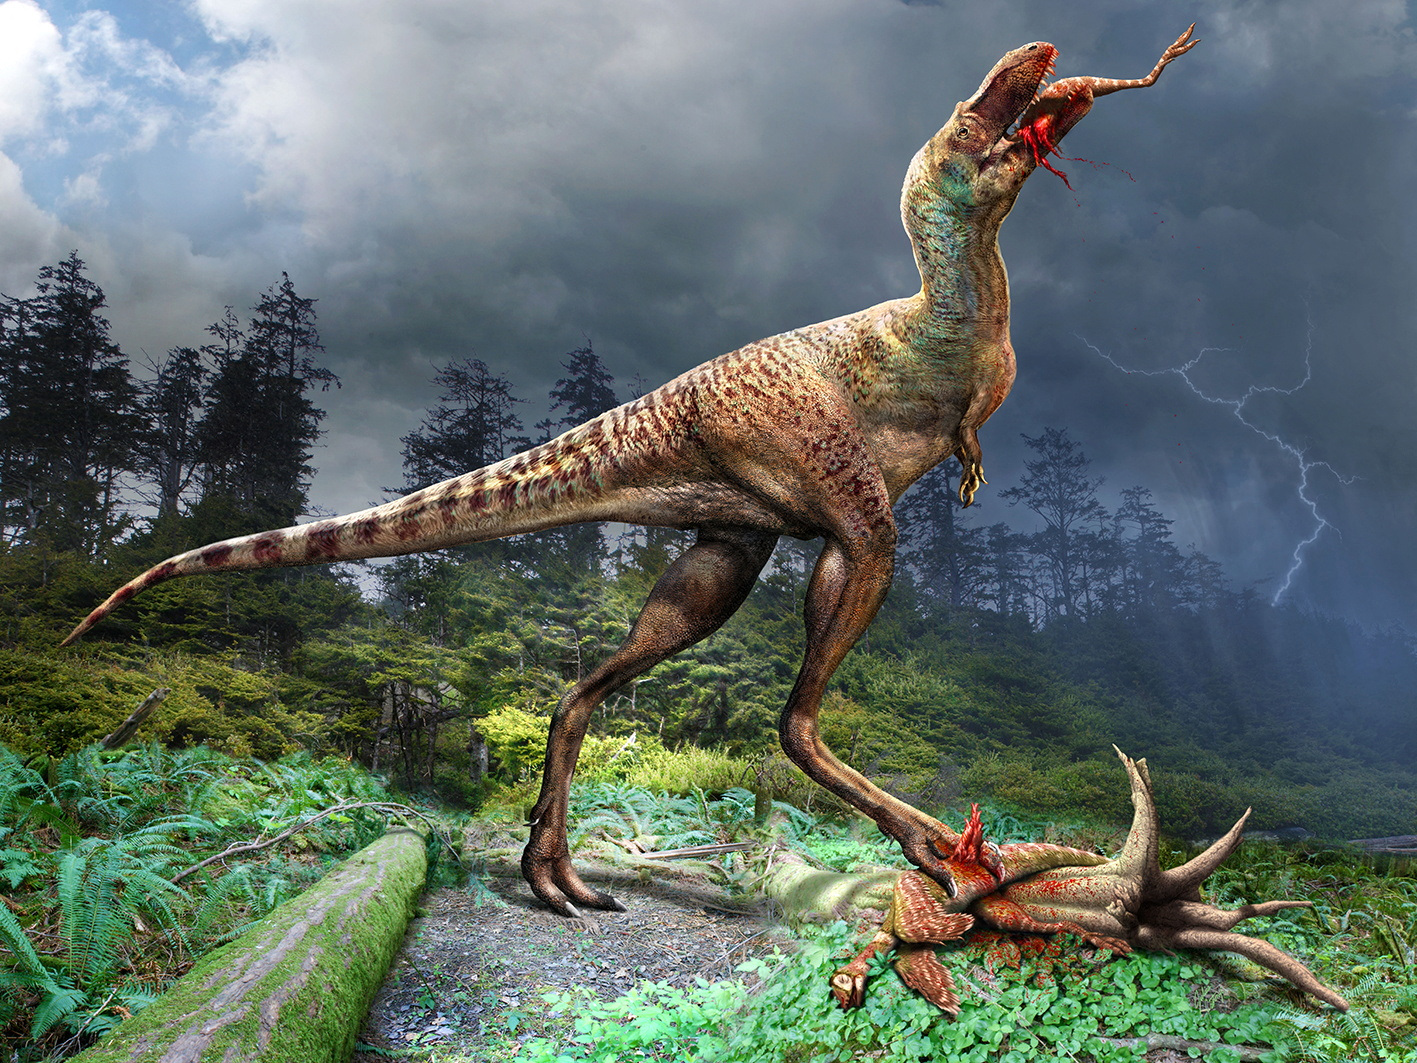 Tyrannosaur Discovered With Last Meal Preserved in Its Stomach